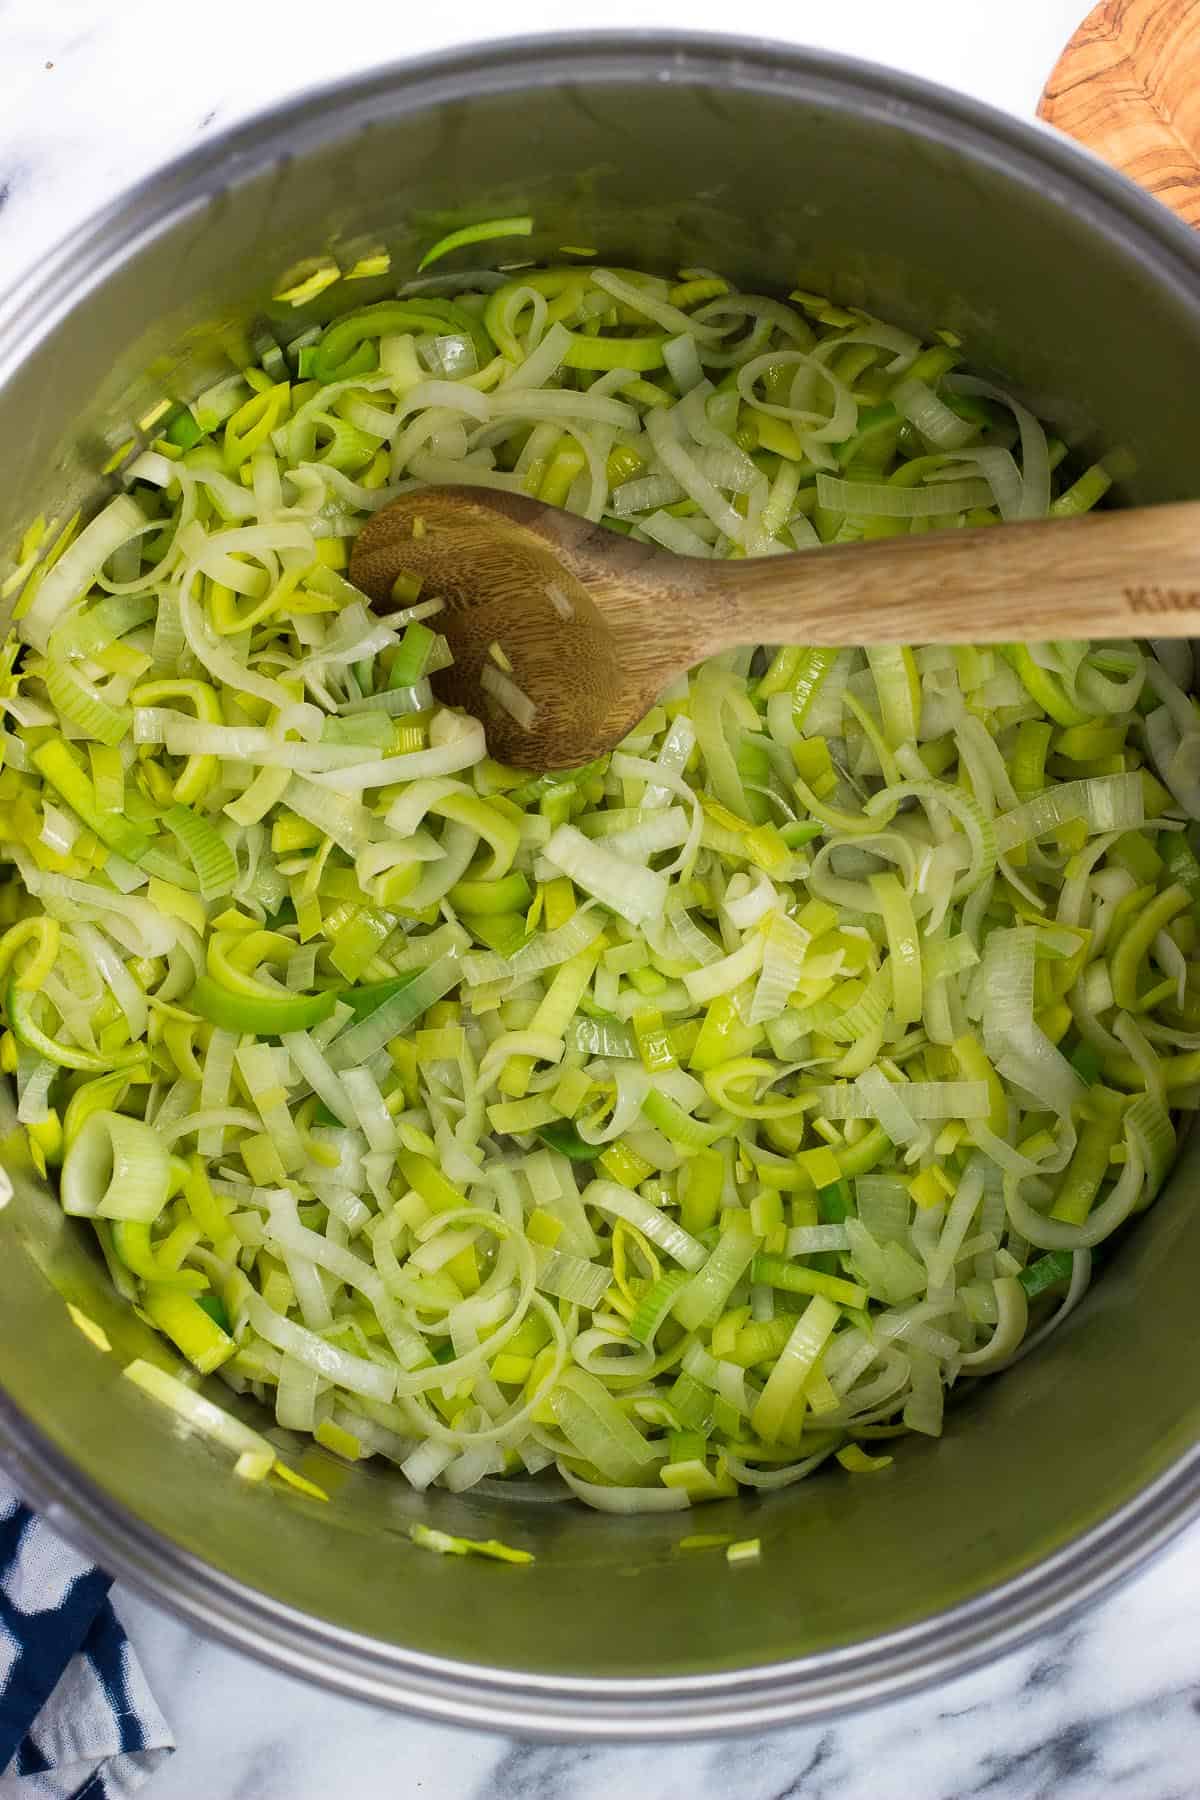 A wooden spoon in the pot of sliced leeks.